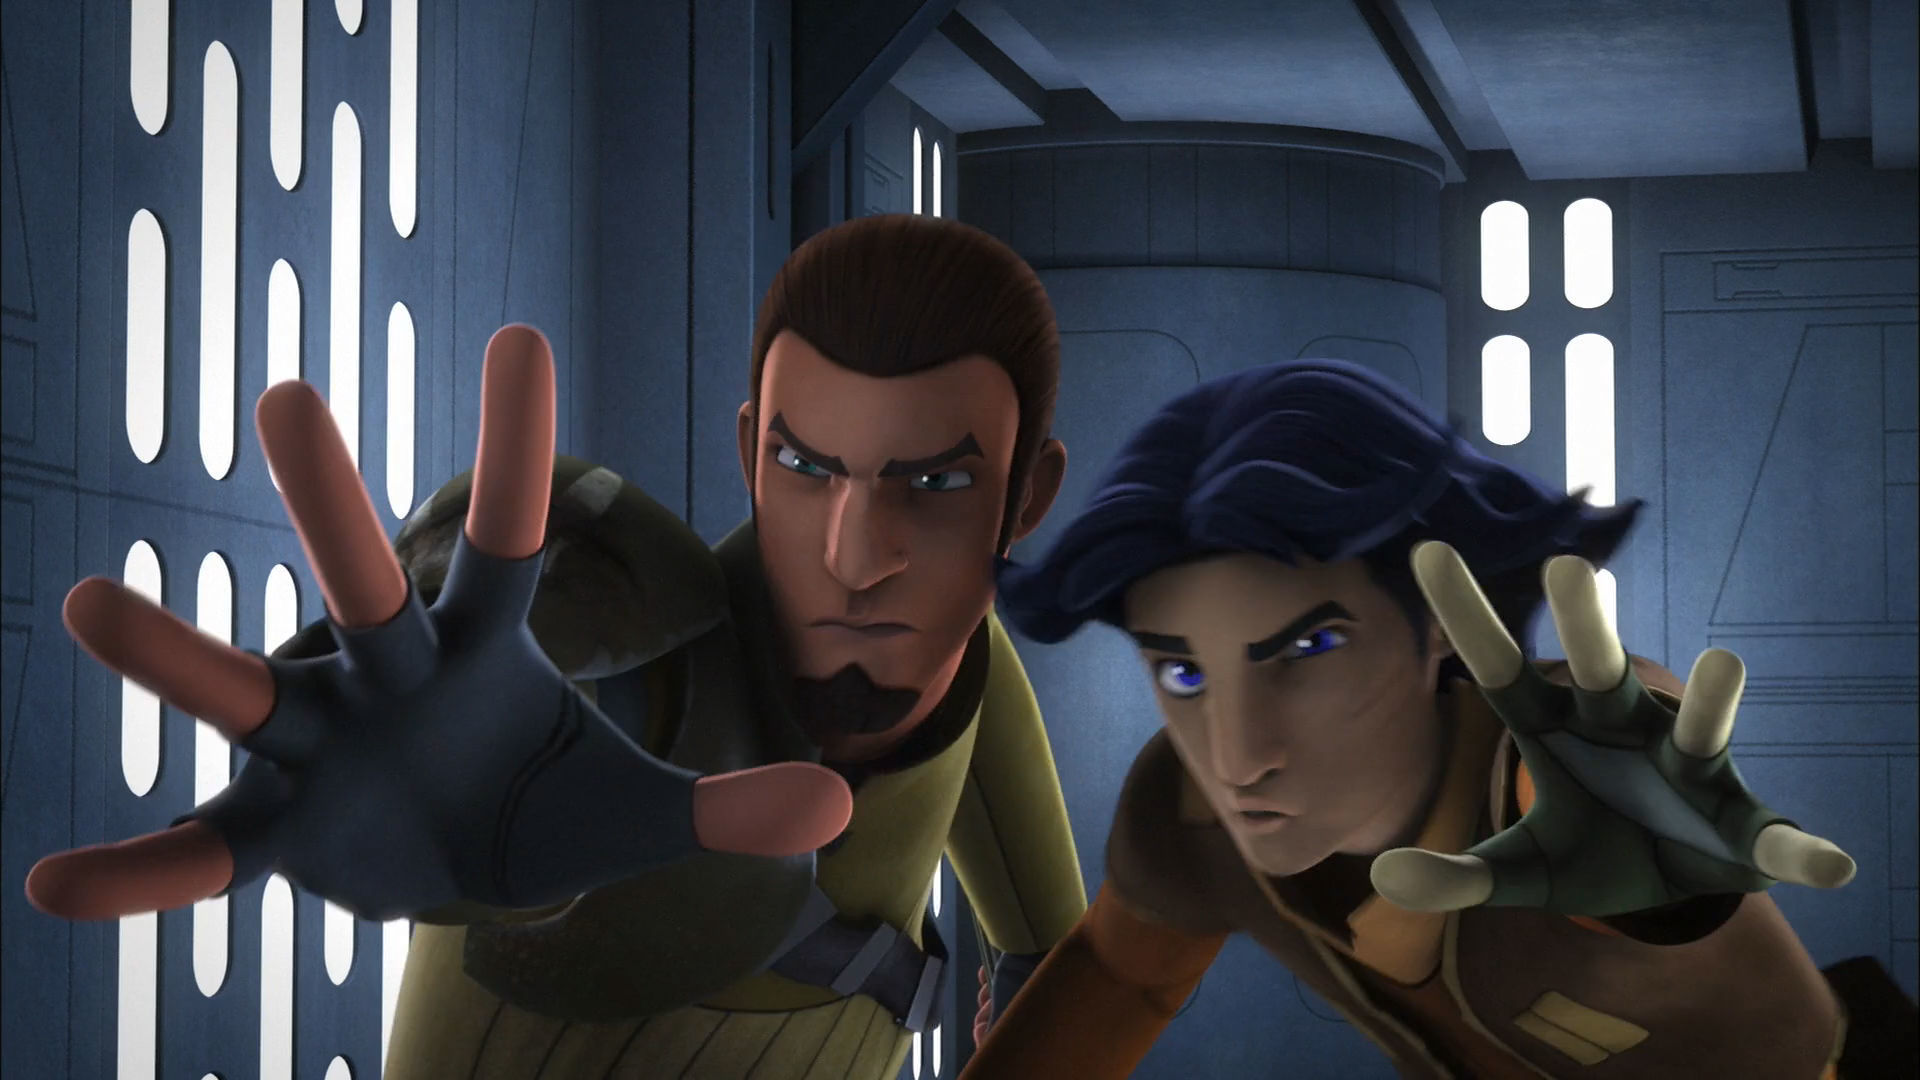 Star Wars Rebels: Complete Season 2 Now Available